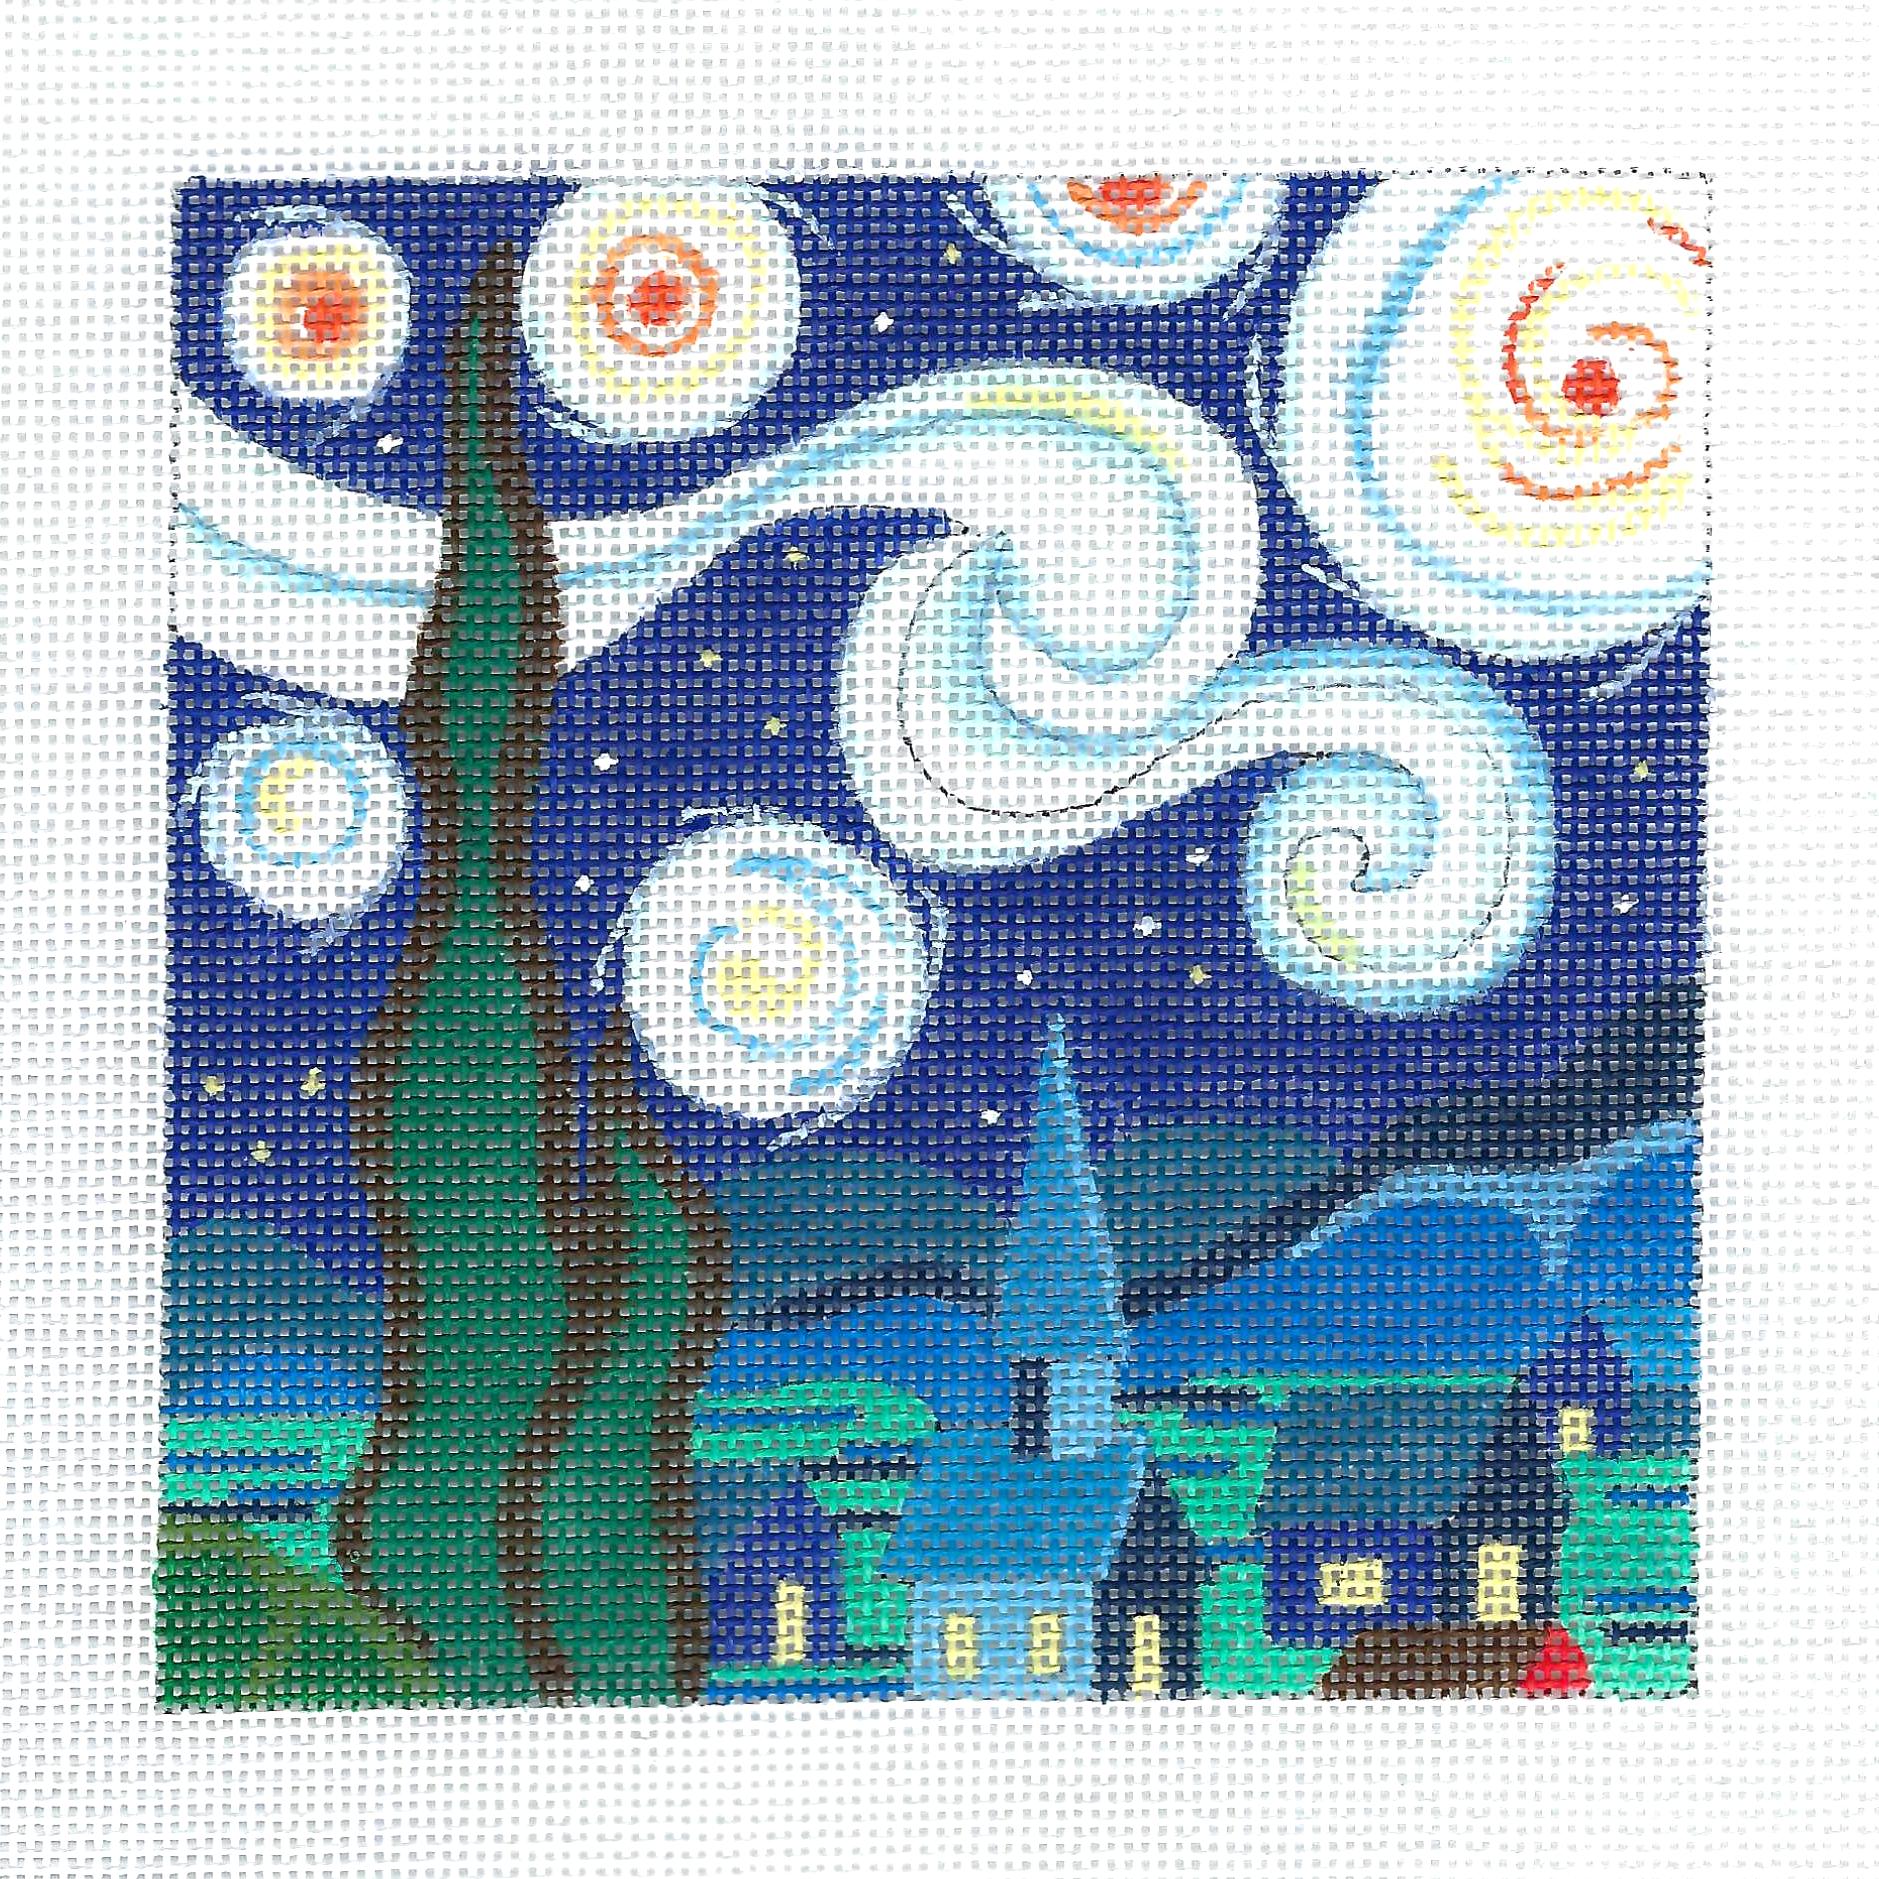 Starry Night Sky 5 by 5 handpainted 18 mesh Needlepoint Canvas by Raymond  Crawford